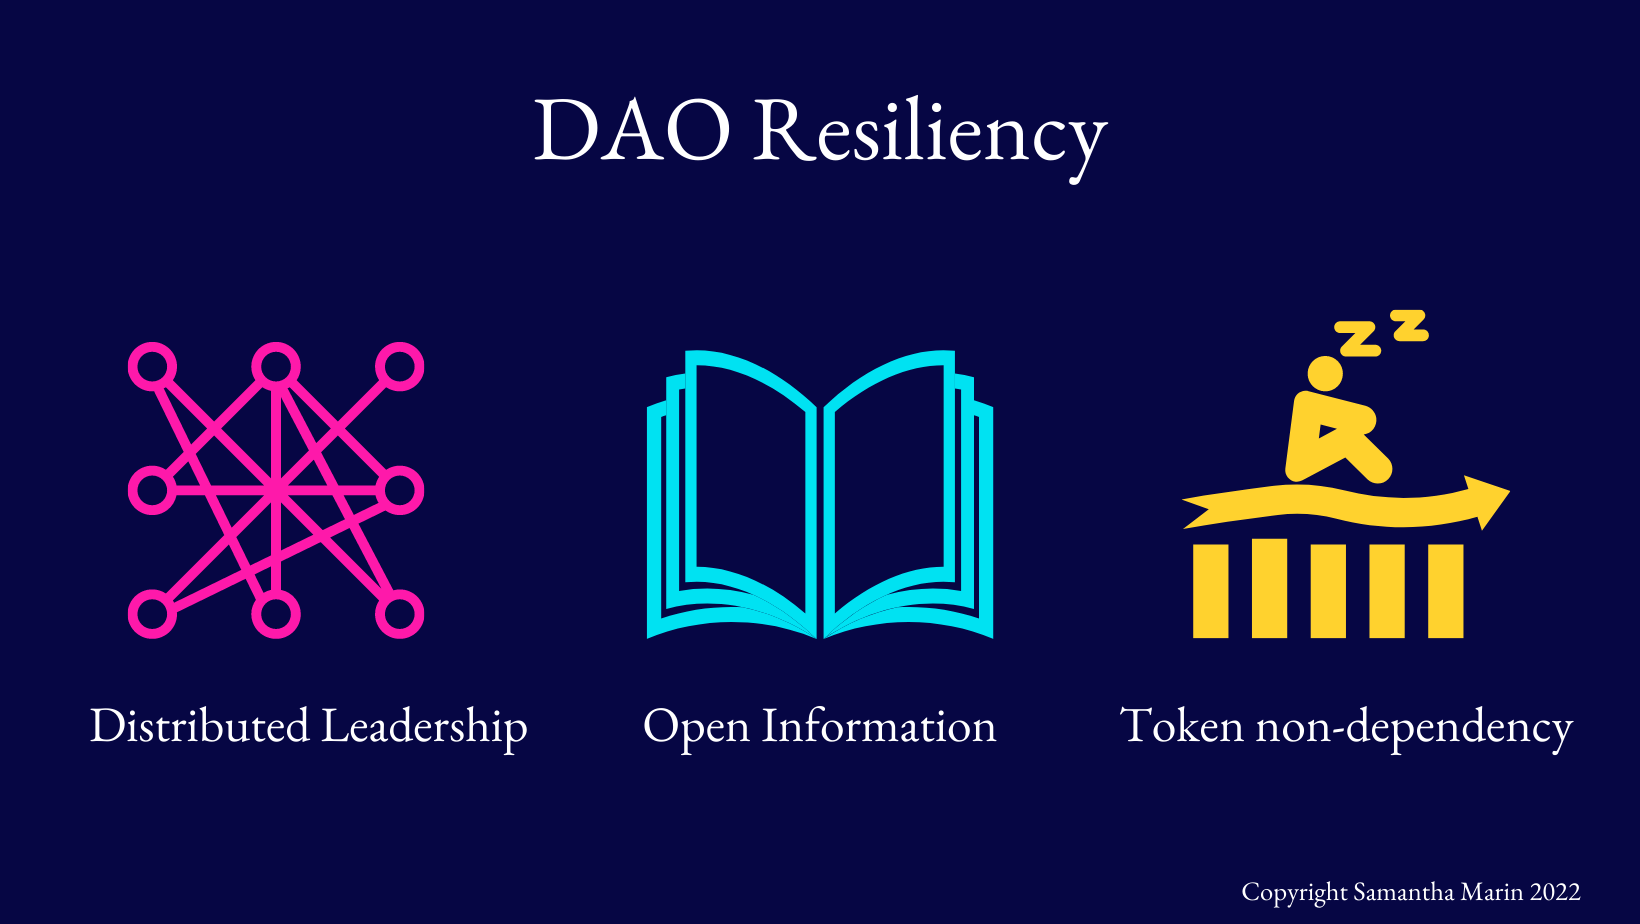 These three aspects of DAOs make them more resilient to a VUCA world.